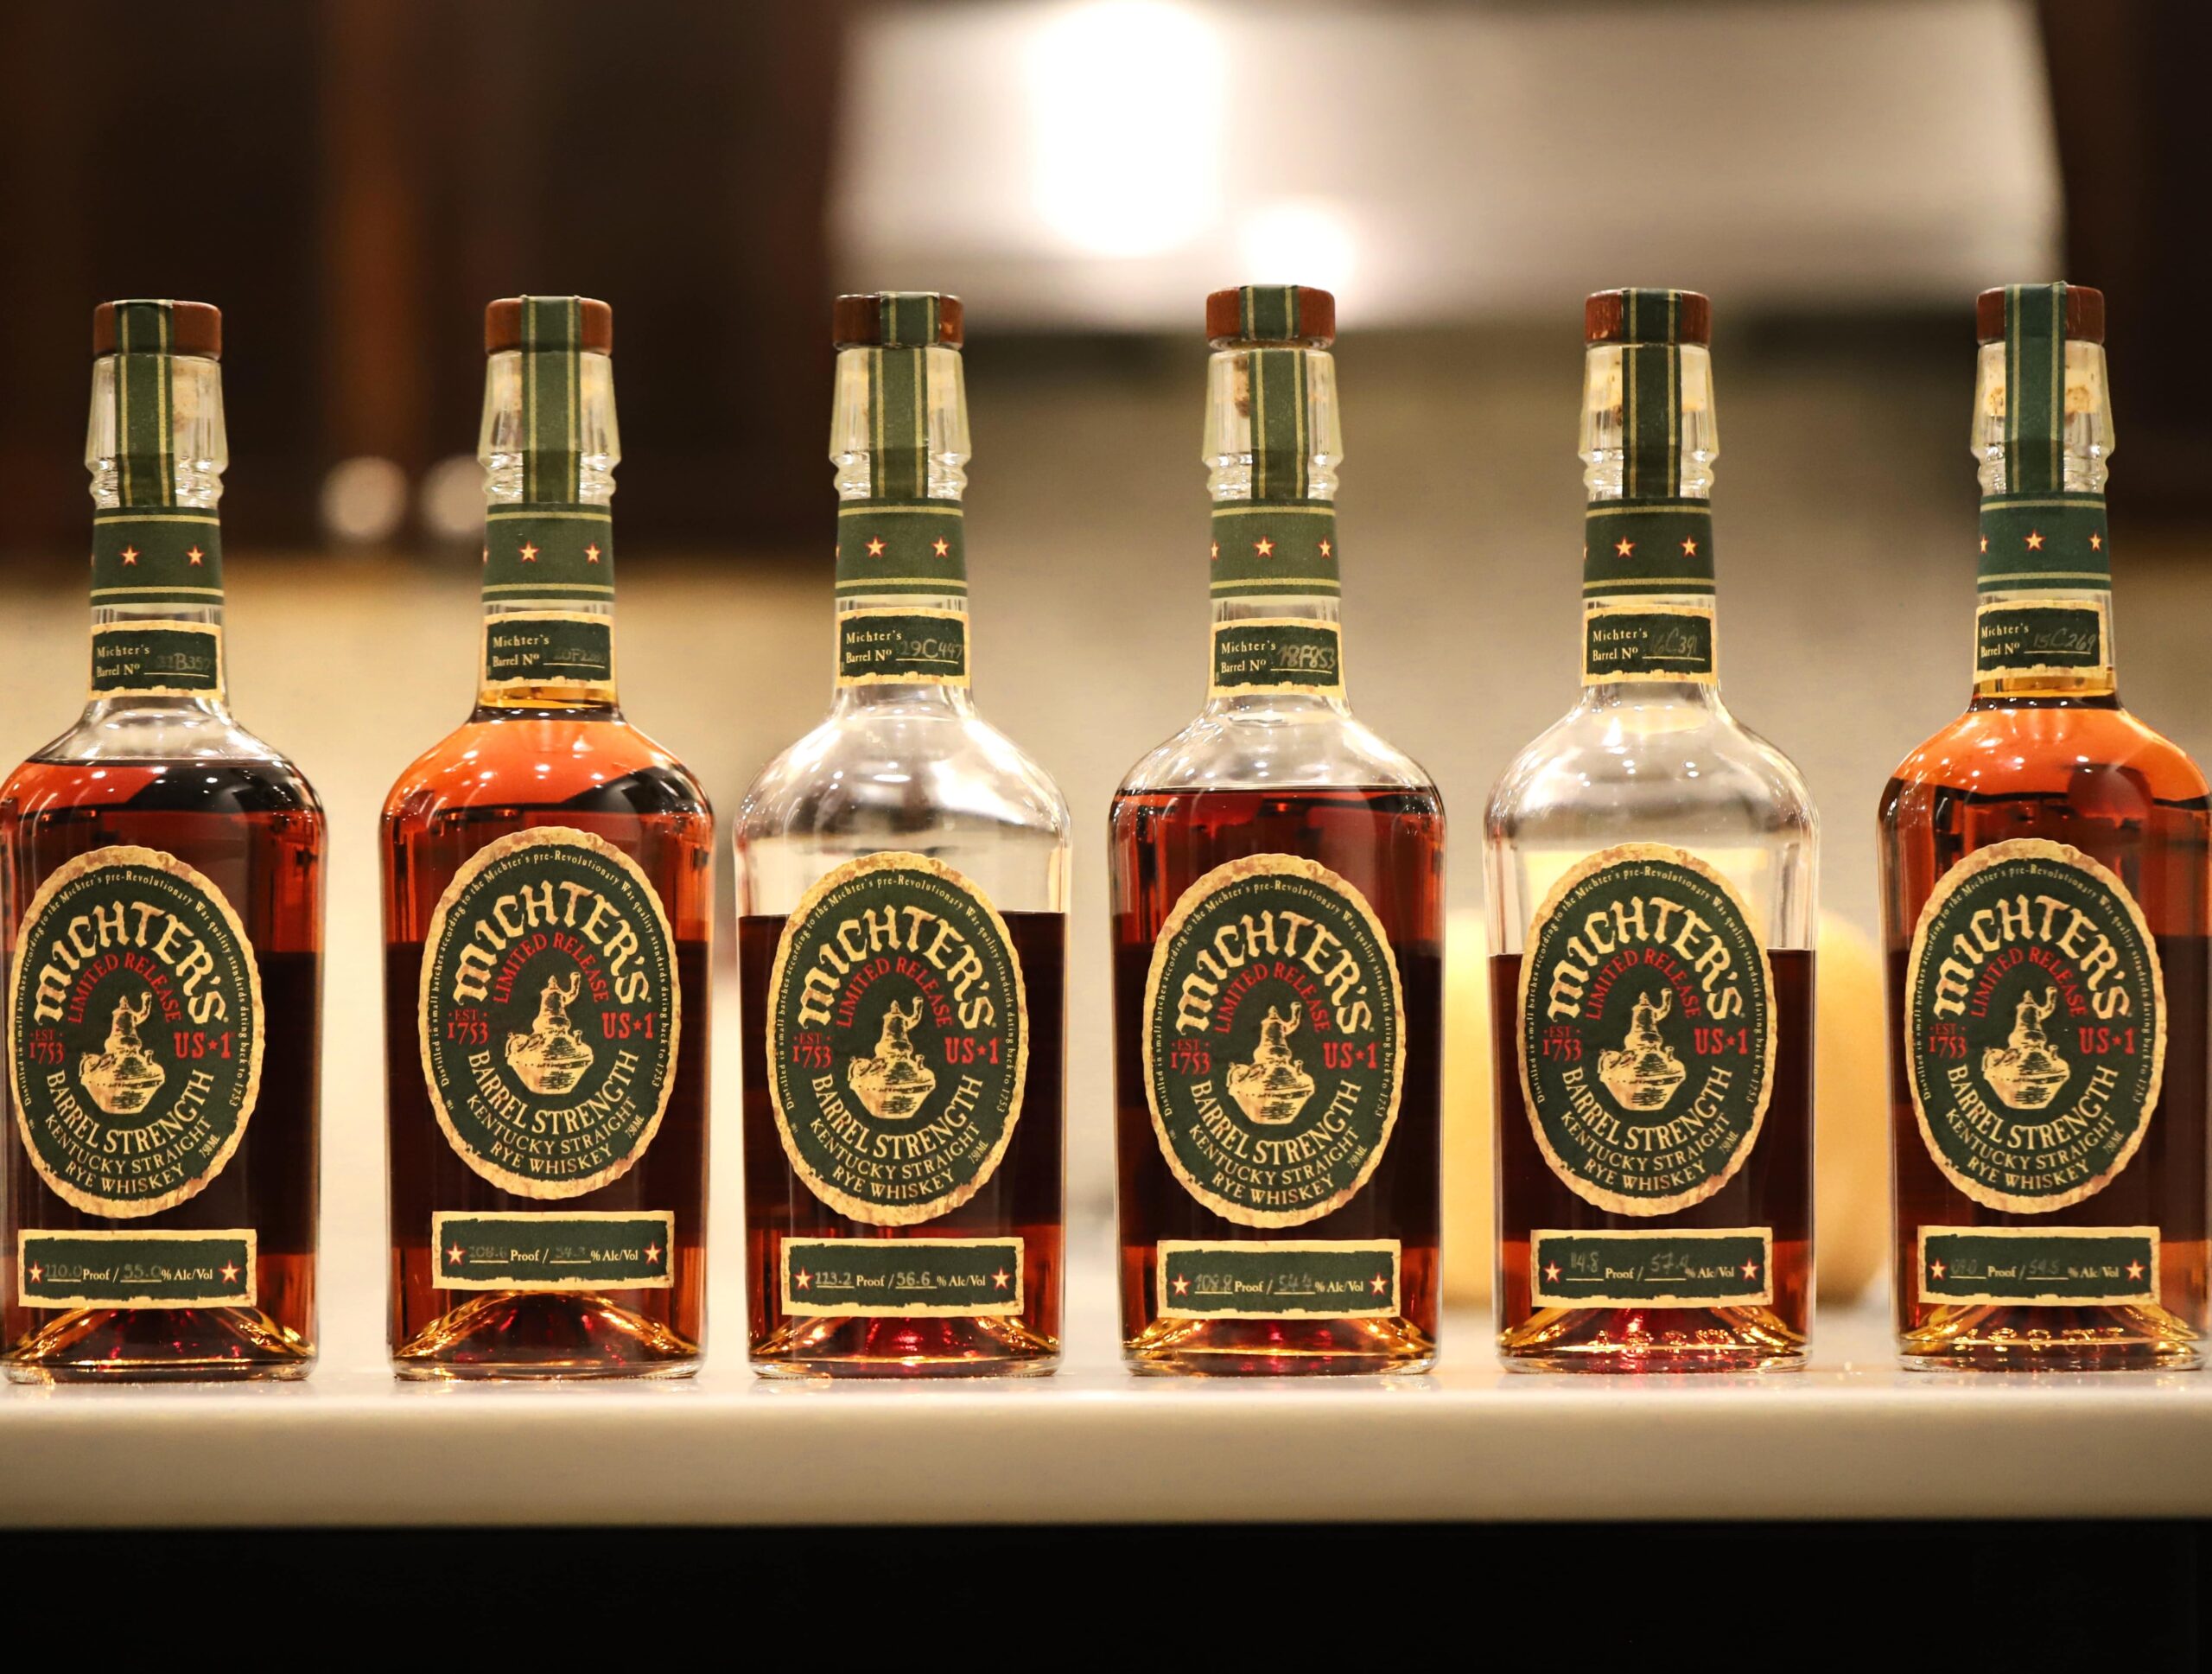 Hey Michter’s, what’s taking so long with the 2023 Barrel Strength Rye release?